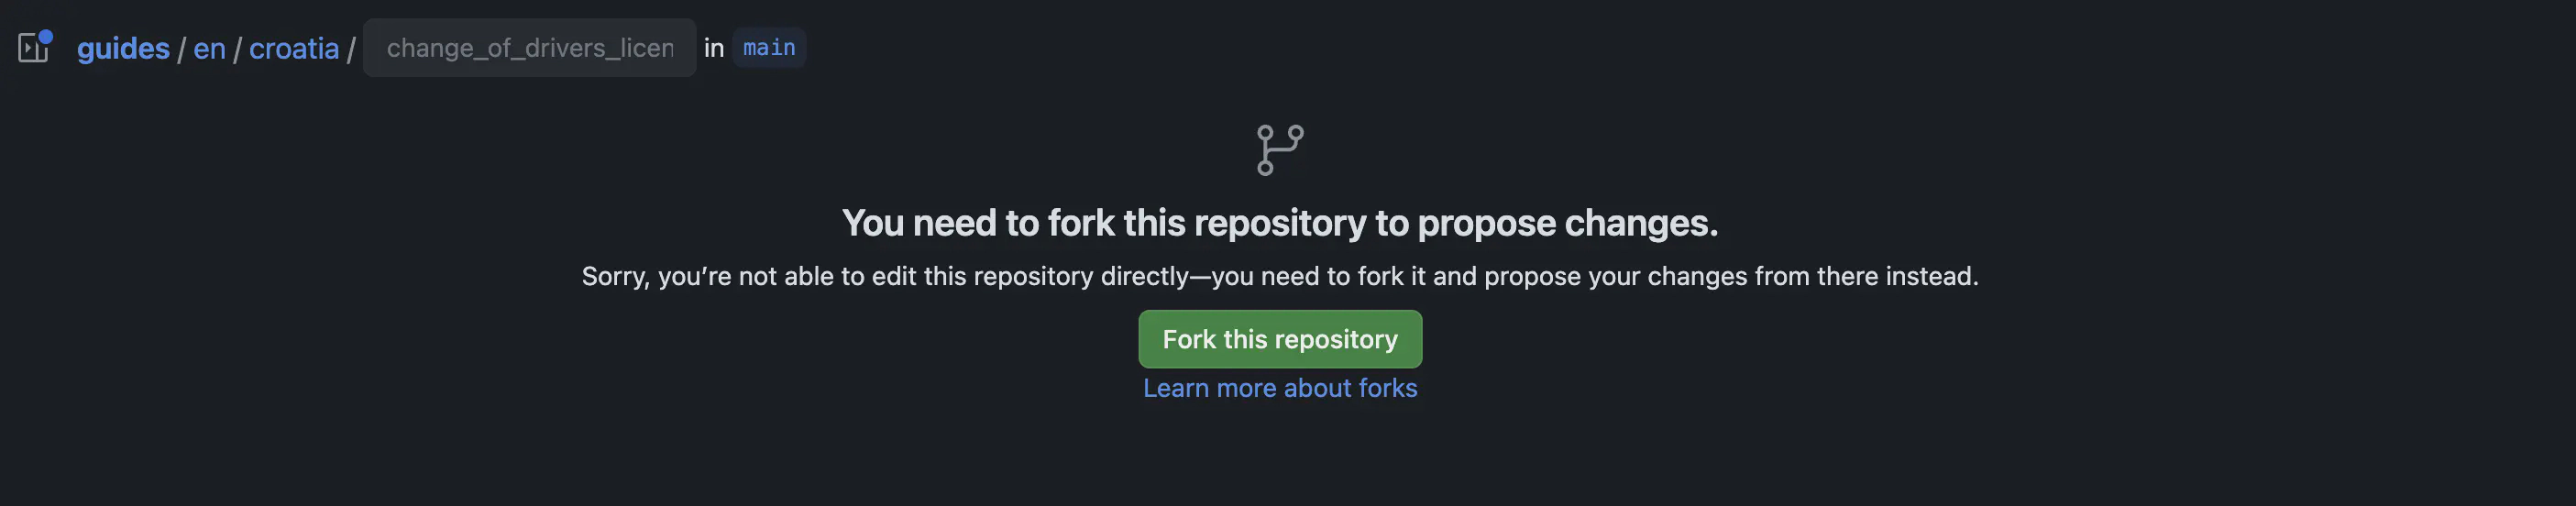 Show how to fork a repository